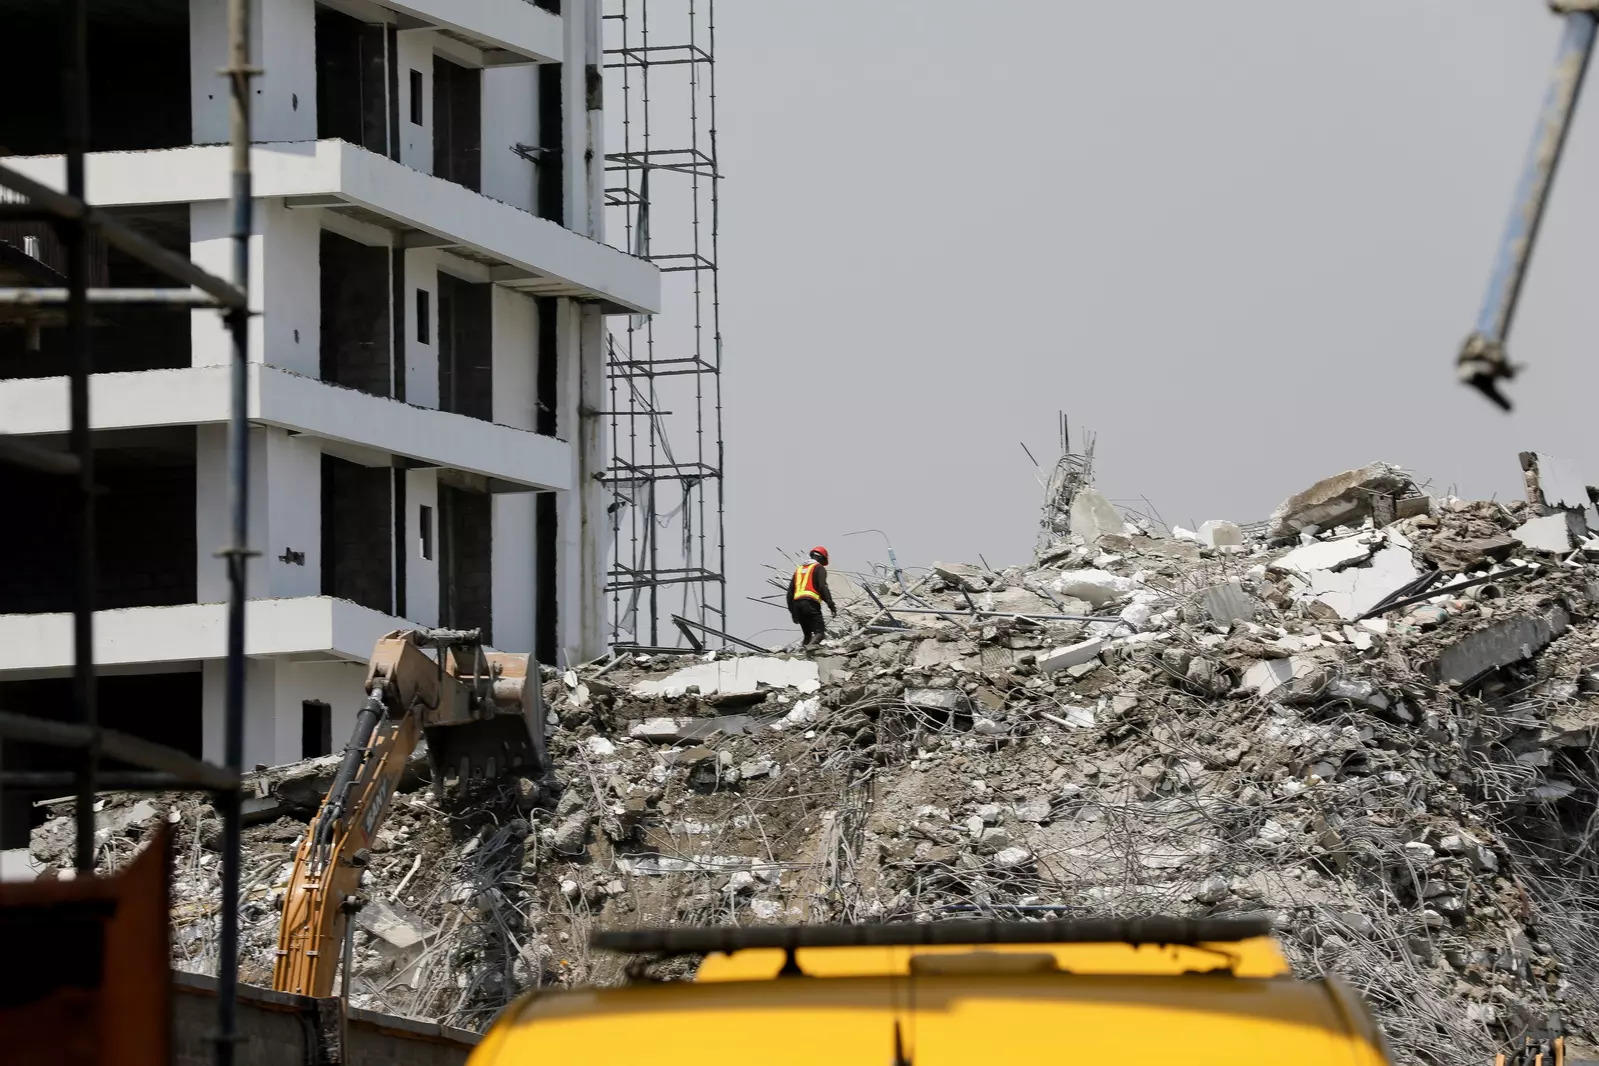 A rescue member works on the debris as search and rescue efforts continue at the site of a collapsed building in Ikoyi, Lagos, Nigeria November 2. (File photo: Reuters)